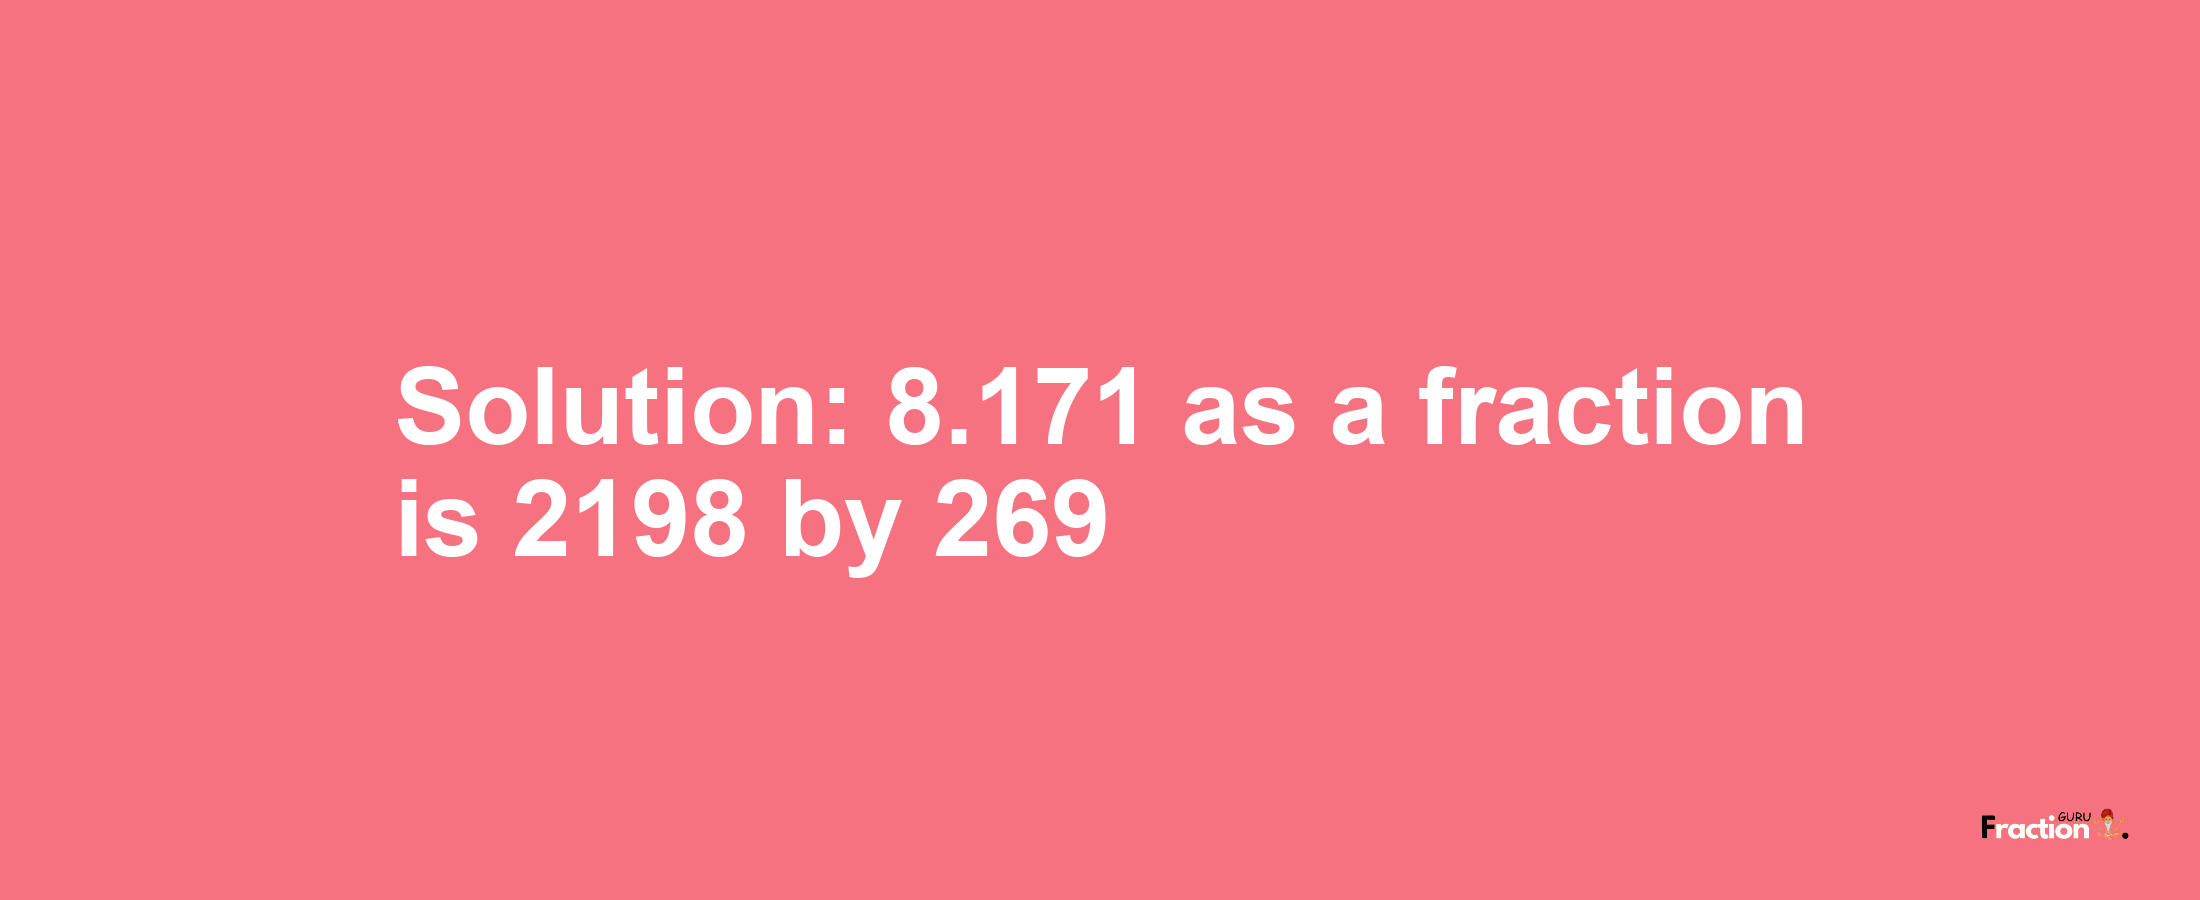 Solution:8.171 as a fraction is 2198/269